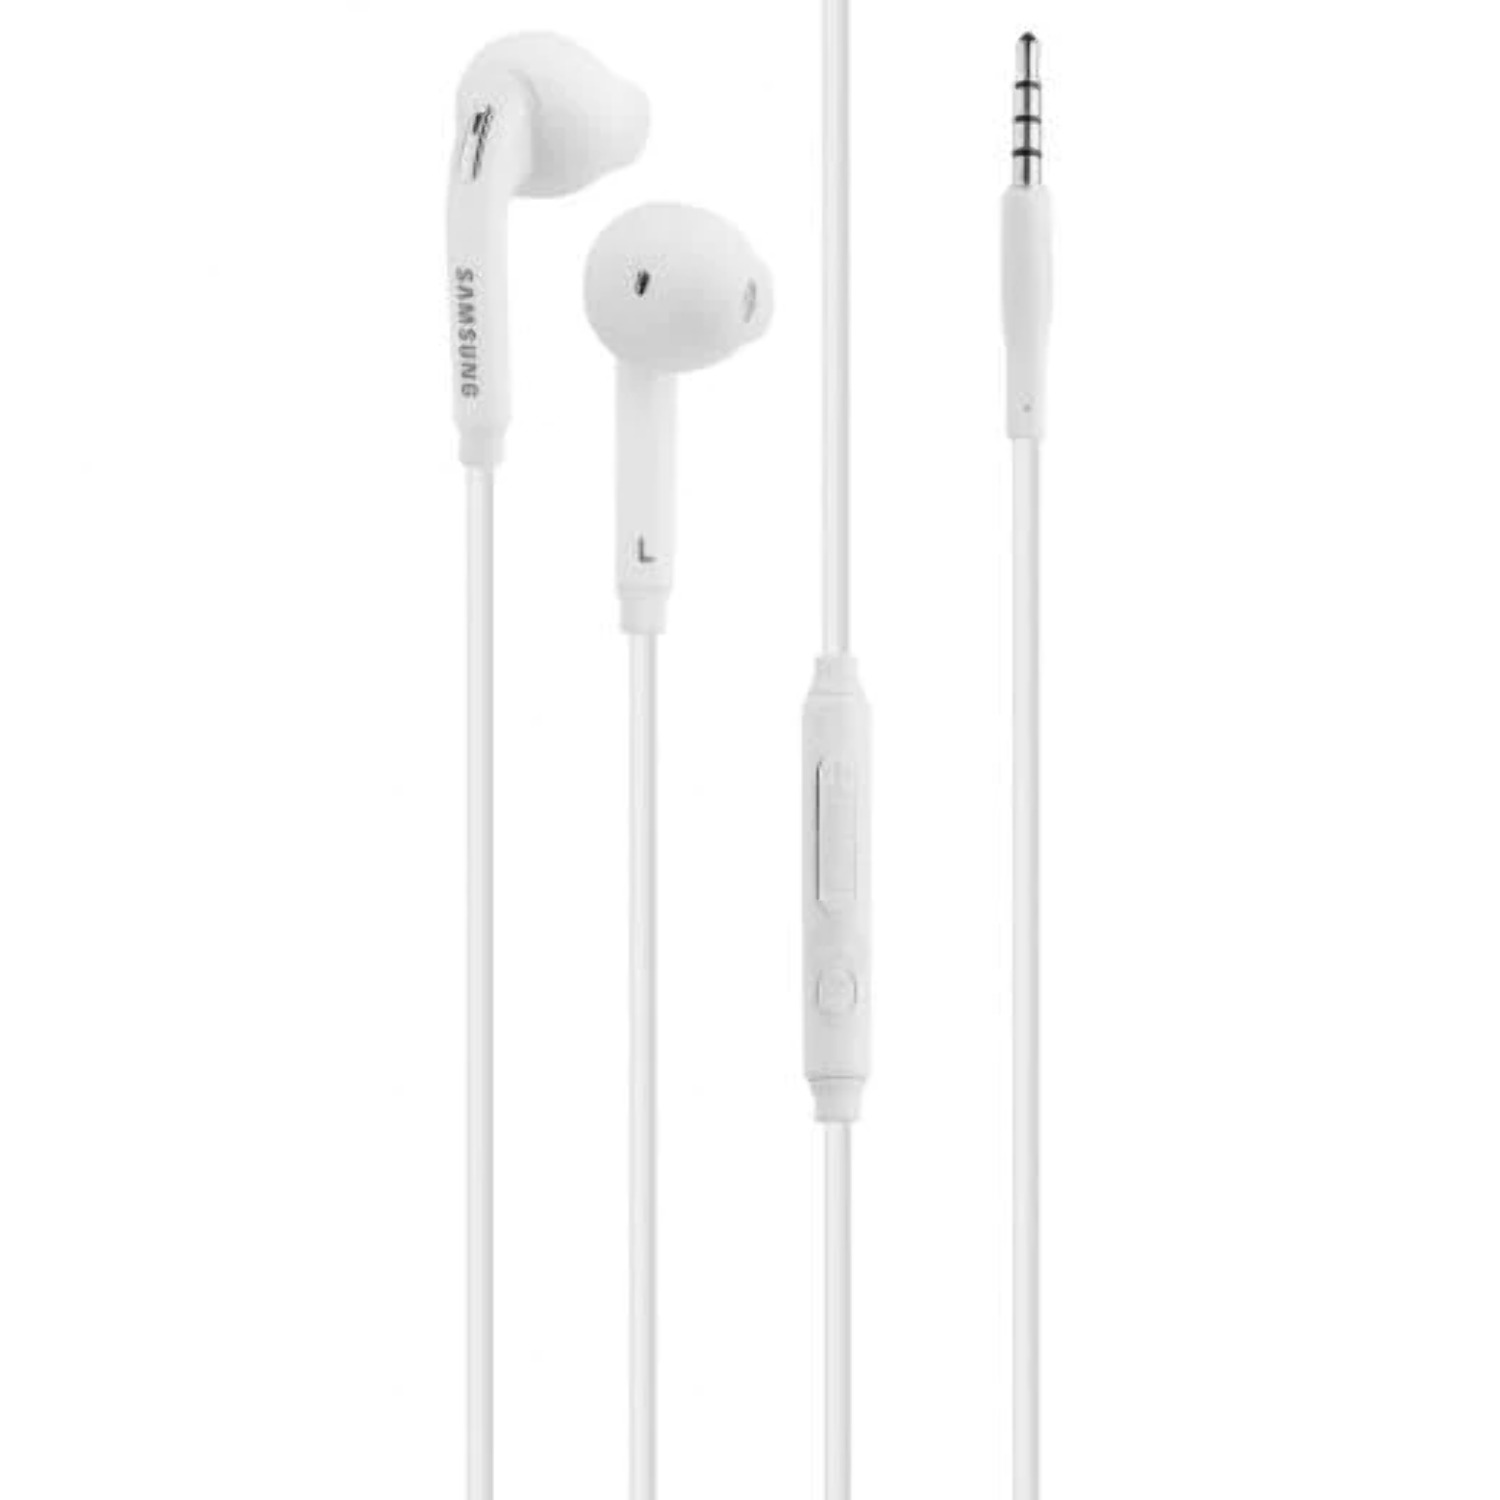 Premium Wired Headset 3.5mm Earbud Stereo In-Ear Headphones with in-line Remote & Microphone Compatible with Doro PhoneEasy 515 - image 1 of 1